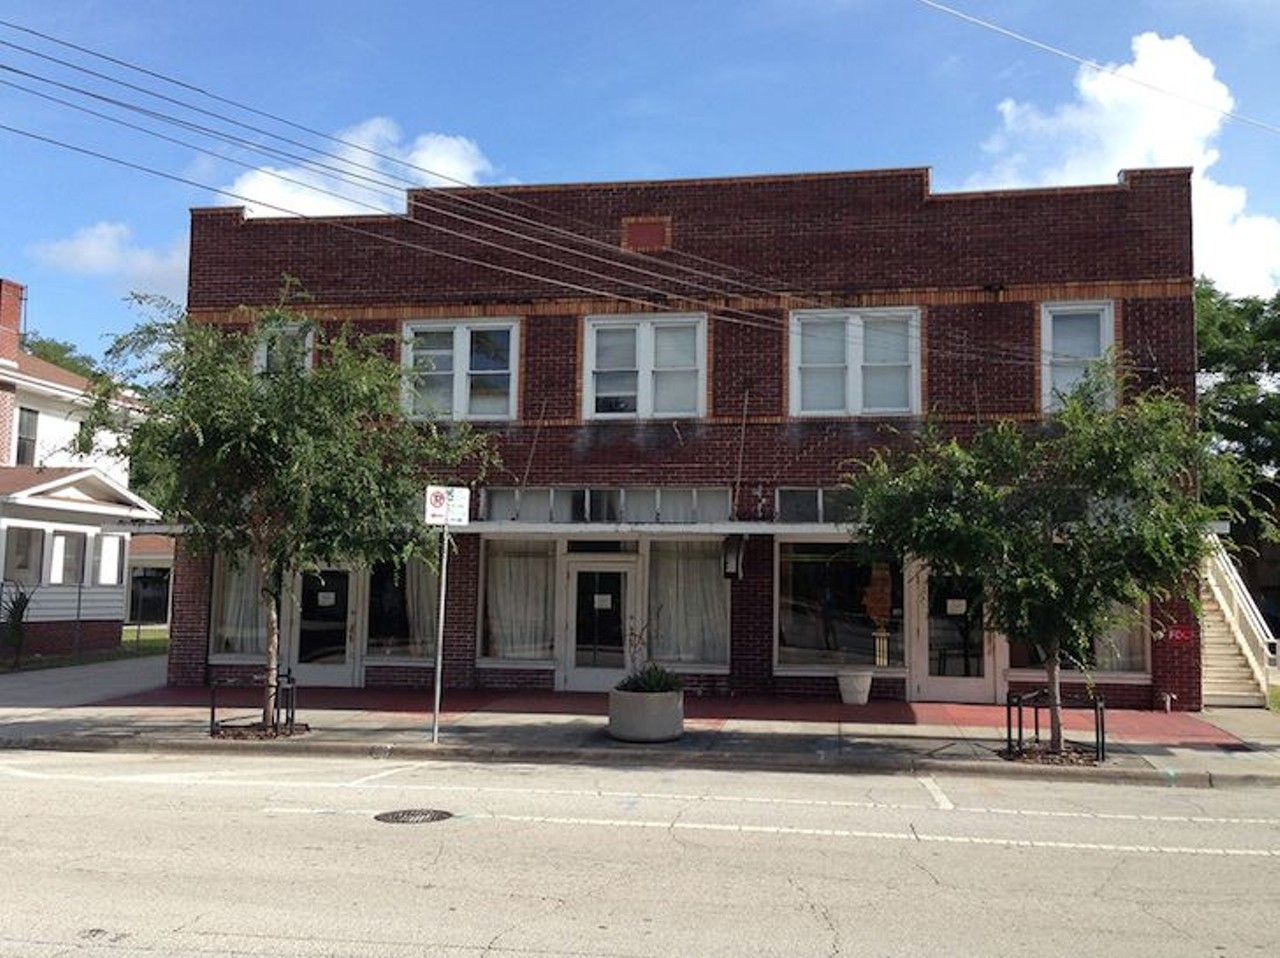 PARRAMORE
Old favorite: Well's Built Museum, 511 W. South St. Once it was a Black-owned hotel that hosted the hottest performers on the so-called chitlin' circuit, like Ella Fitzgerald and Louis Armstrong. Now it preserves local African American history and culture.
Photo via City of Orlando